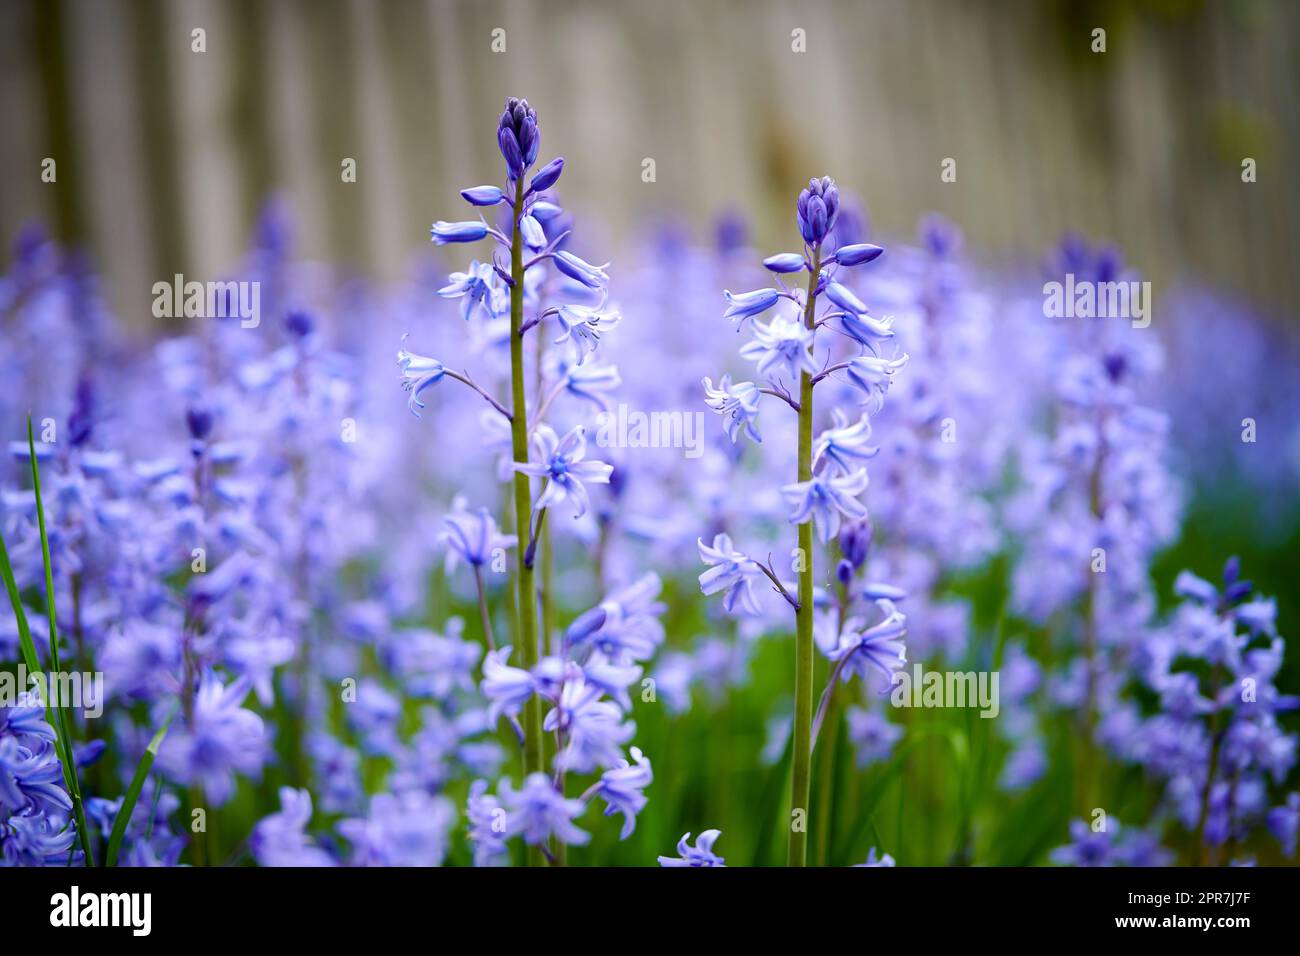 A vibrant bunch of Bluebell flowers growing in a backyard garden on a  summer day. Colorful and bright purple plants bloom during spring outdoors  in nature. The details of botanical foliage in